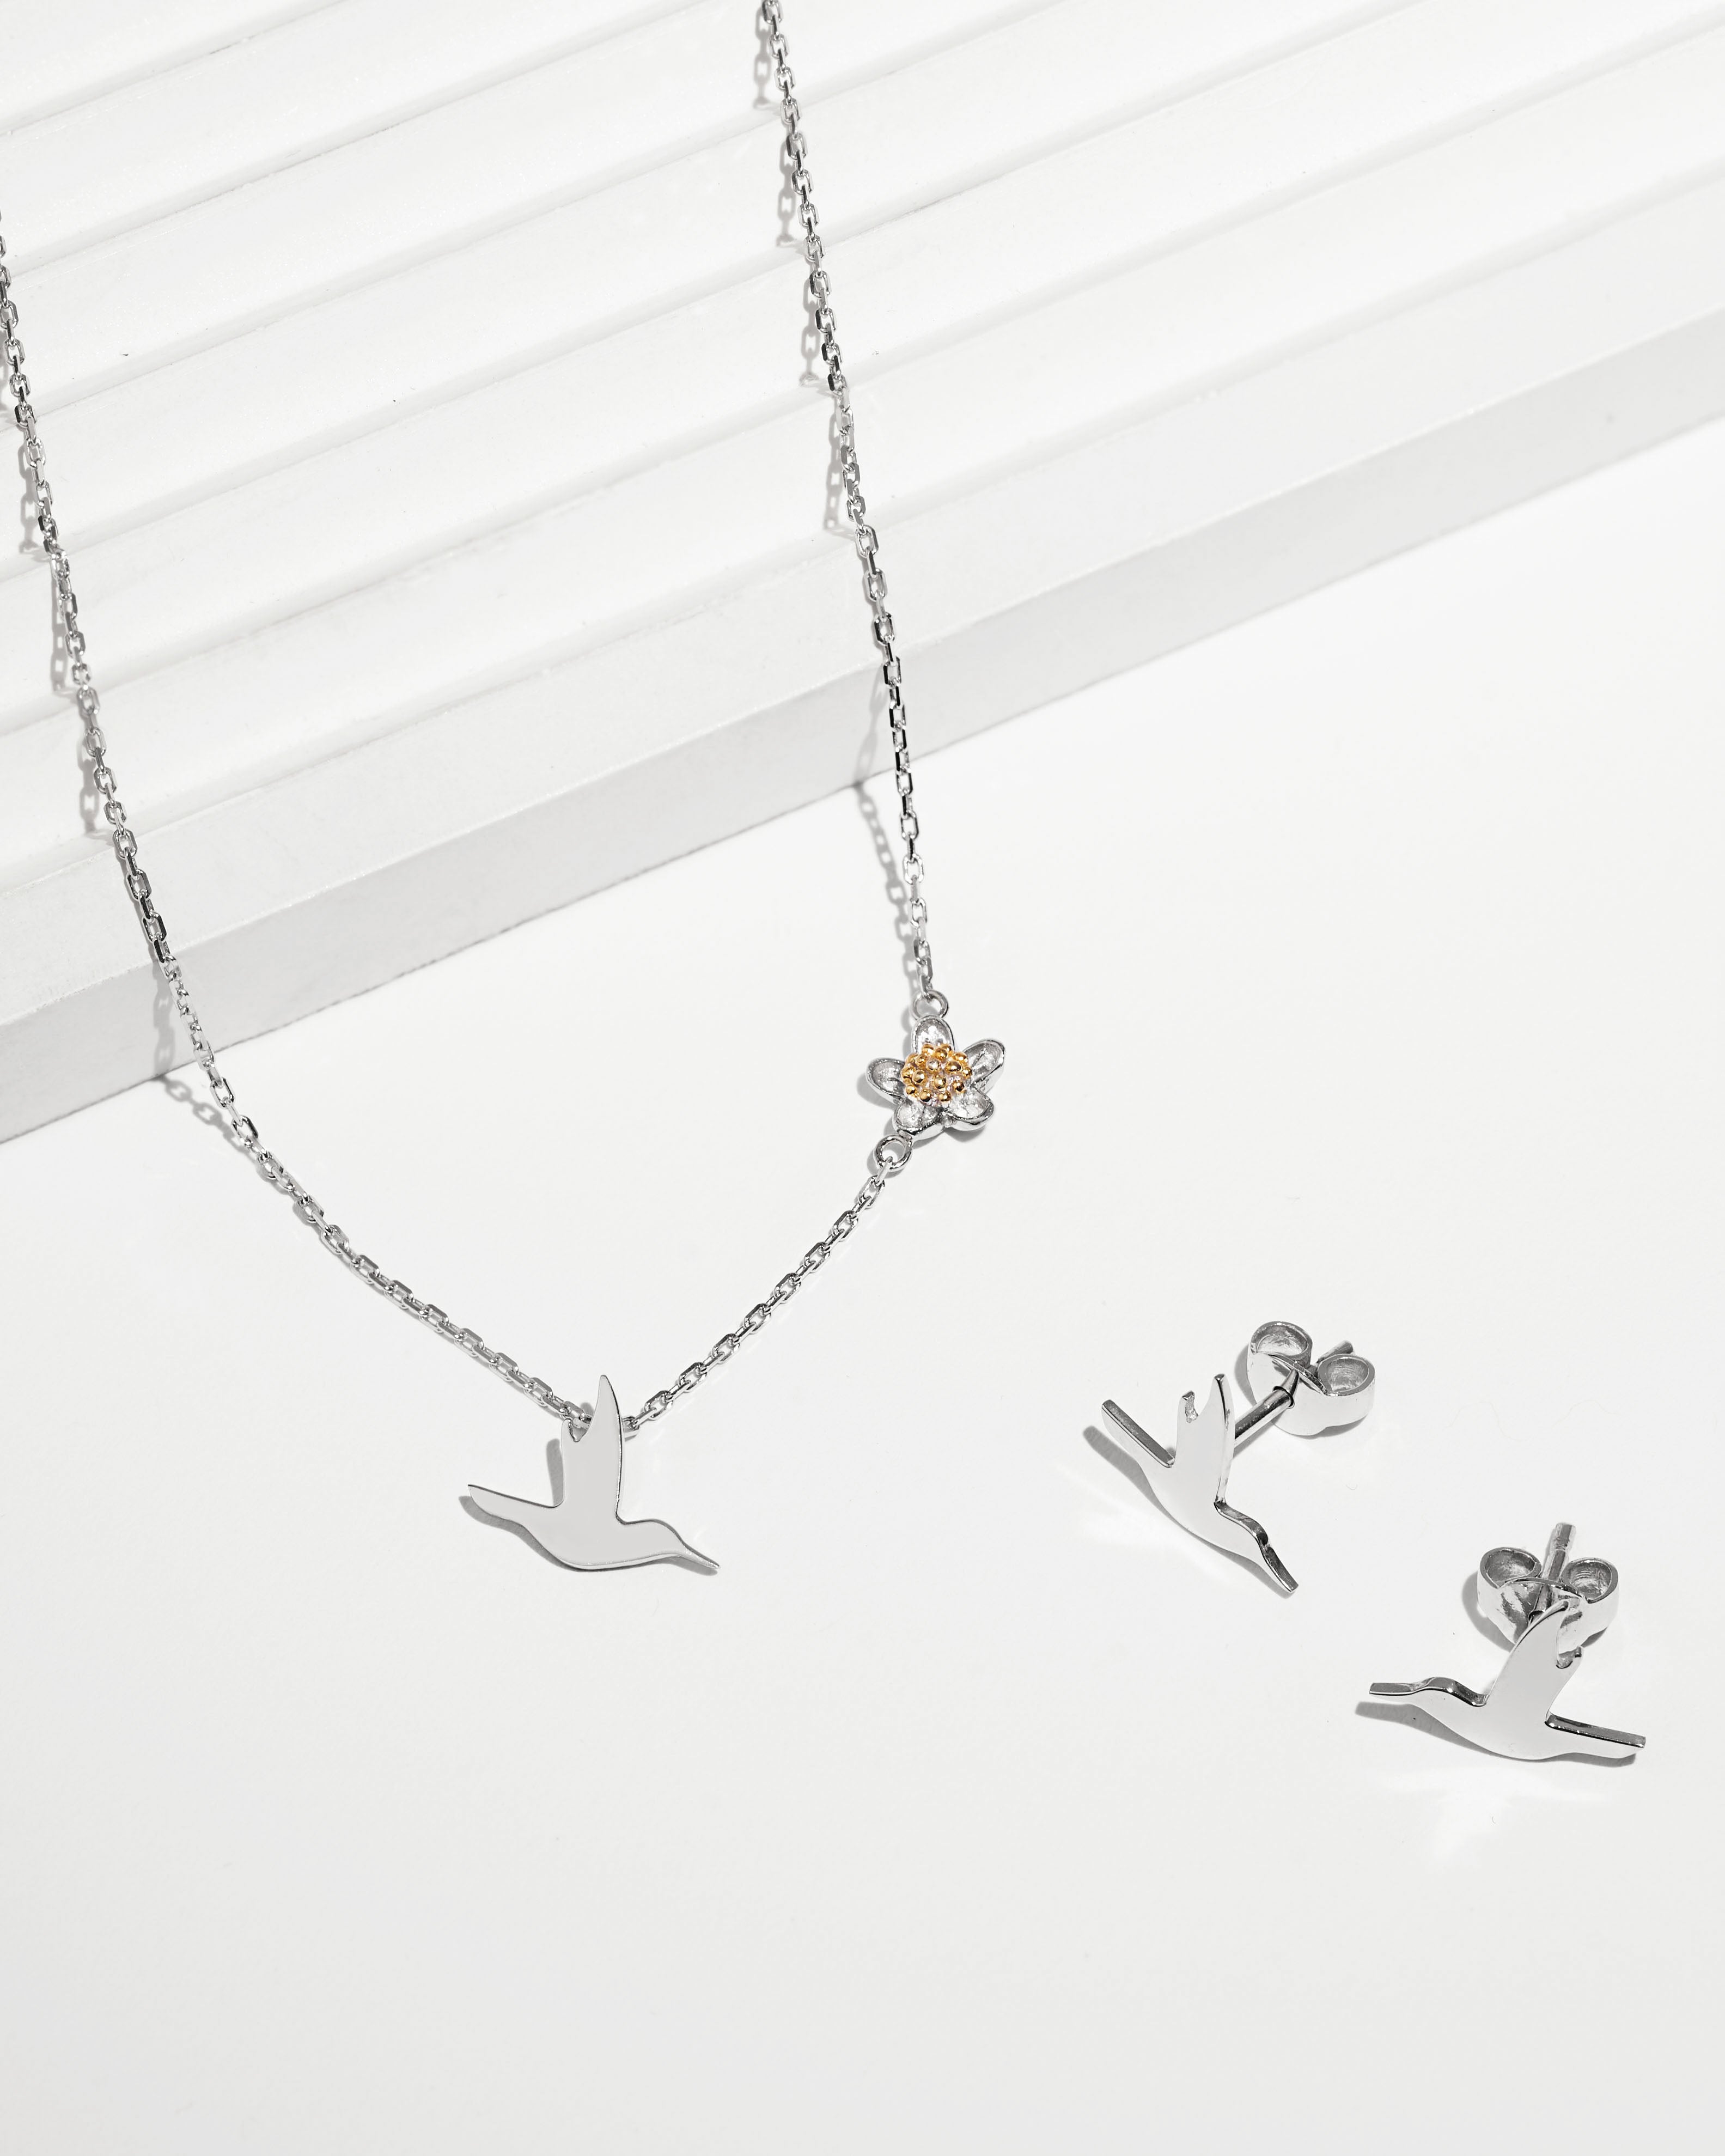 Bird and Flower necklace, silver color